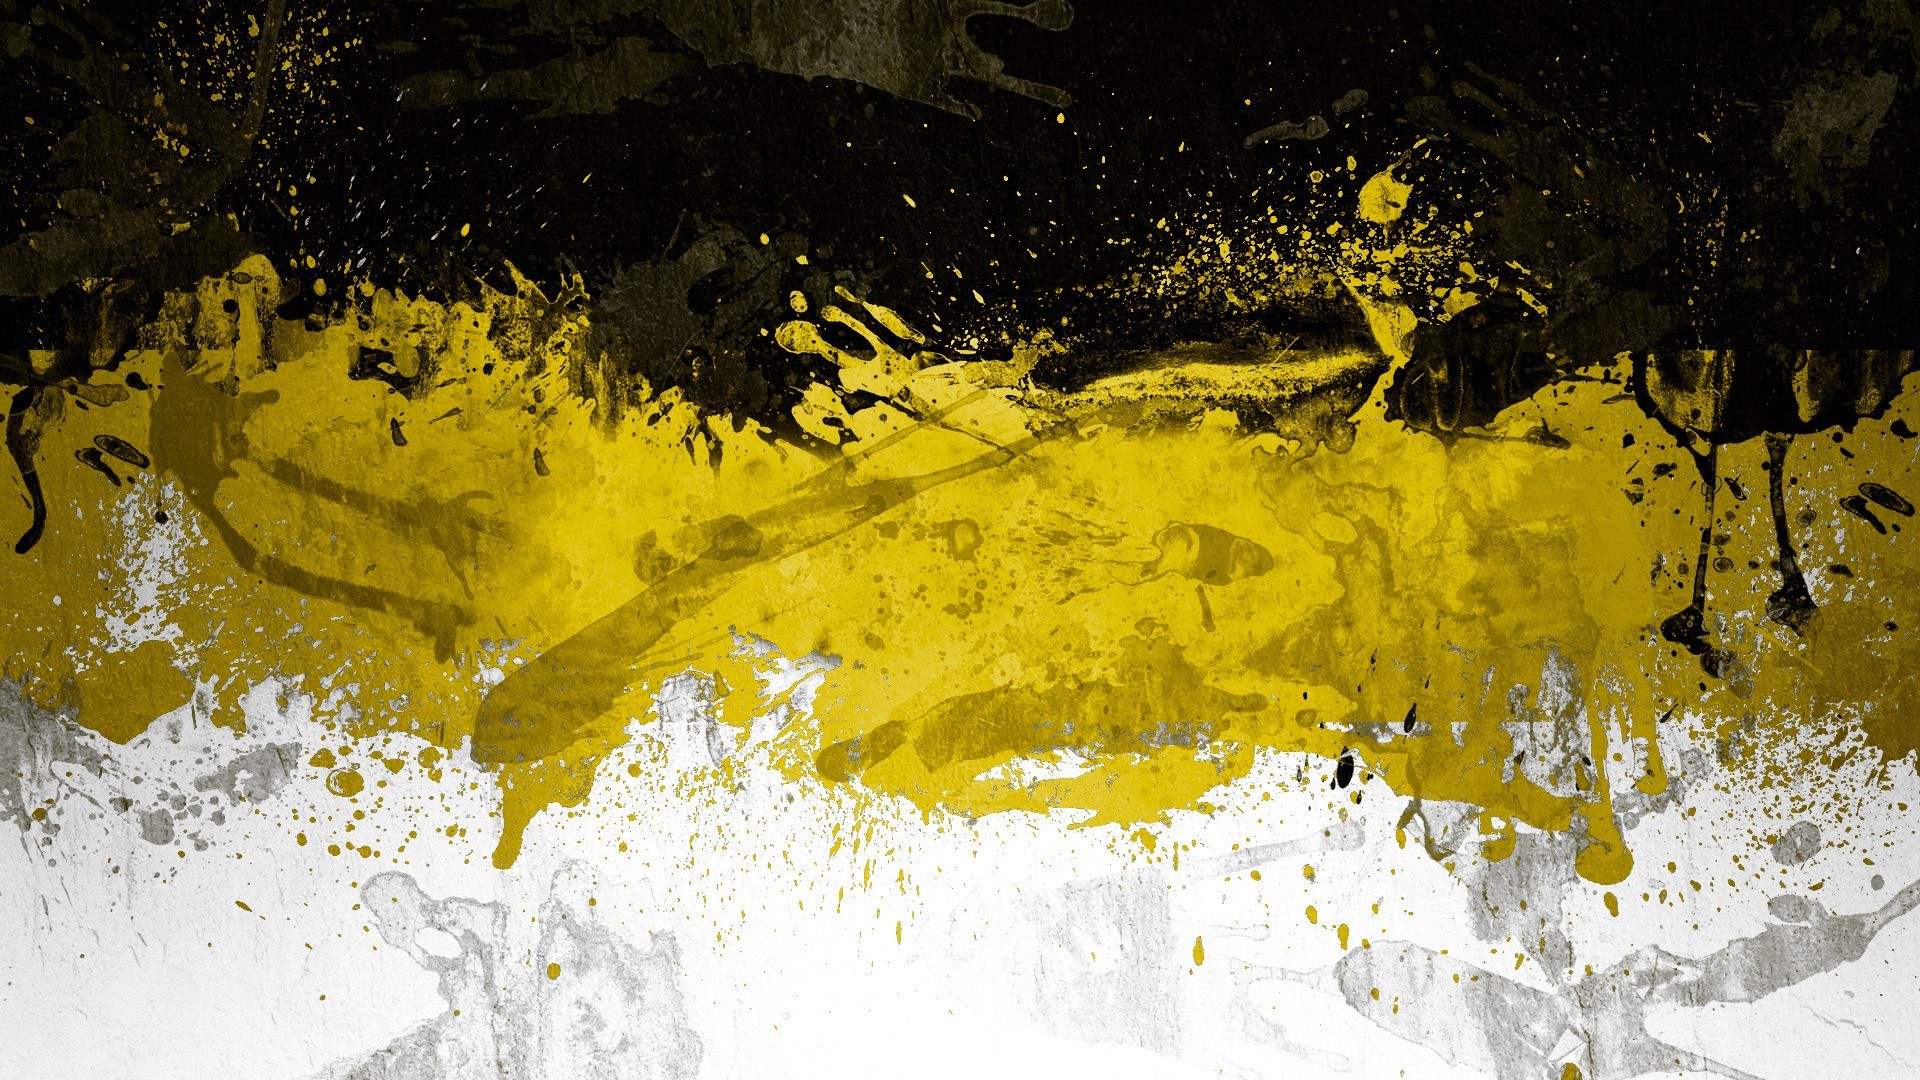 Black and Yellow background ·① Download free stunning backgrounds for